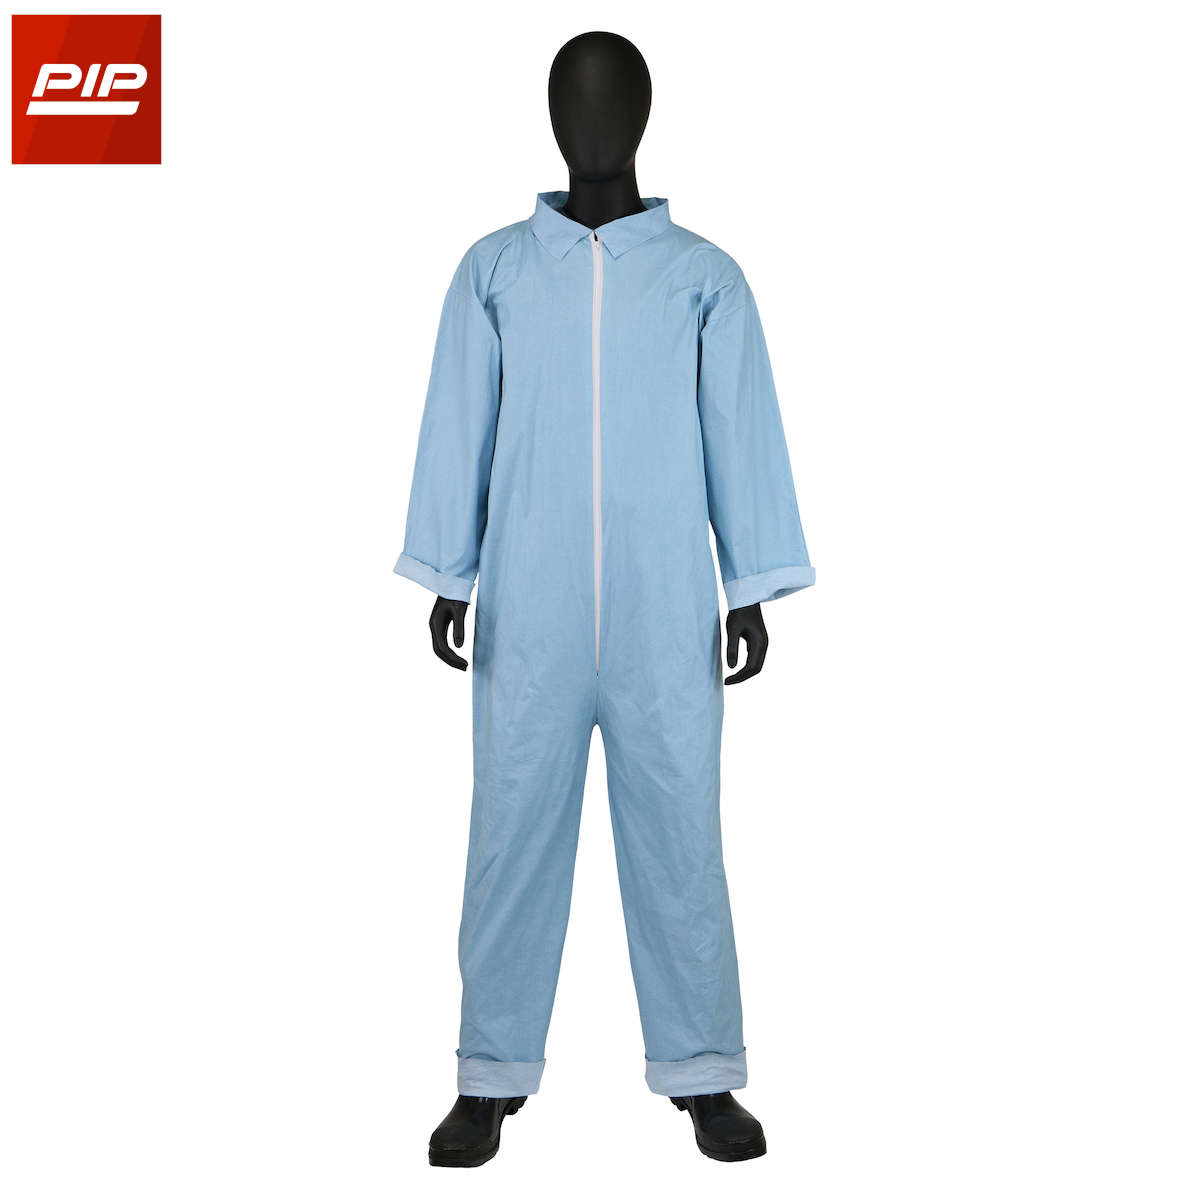 PIP 3100 Posi-Wear Flame Resistant Basic Coverall, 80 gsm, Case of 25